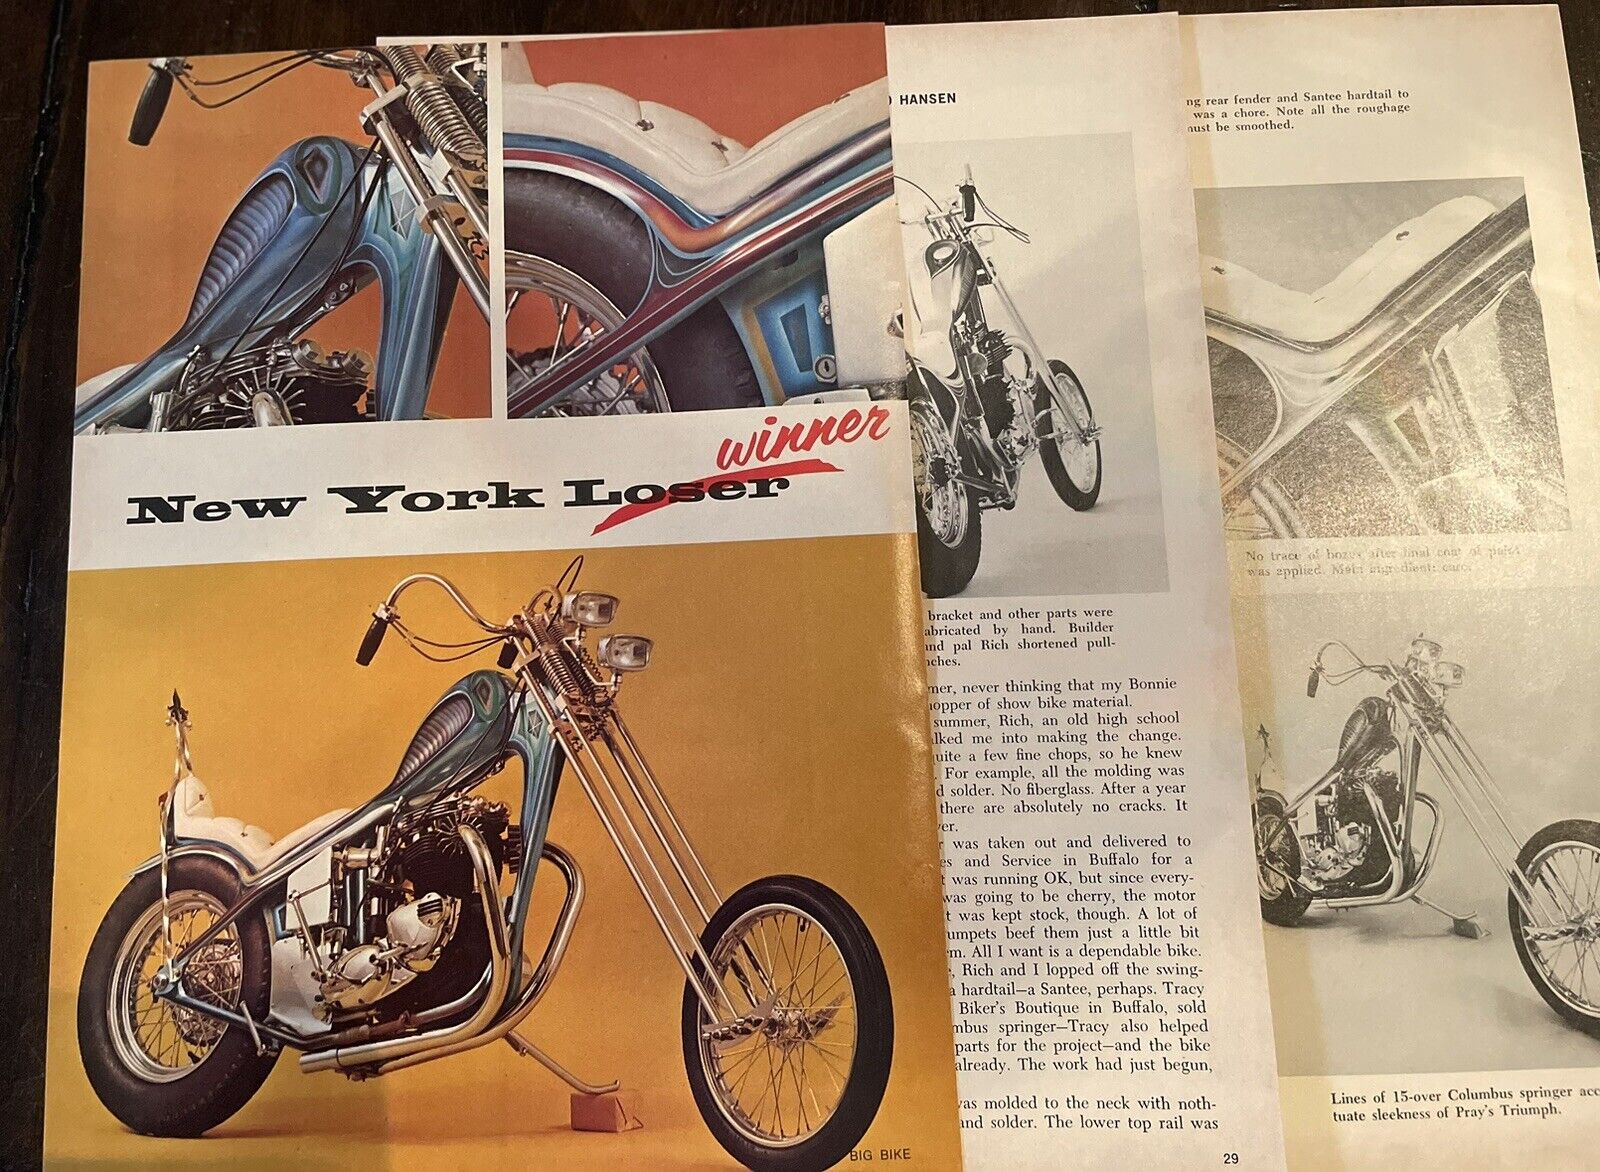 1969 Triumph Custom Chopper Vintage Motorcycle Article from 1972 Magazine